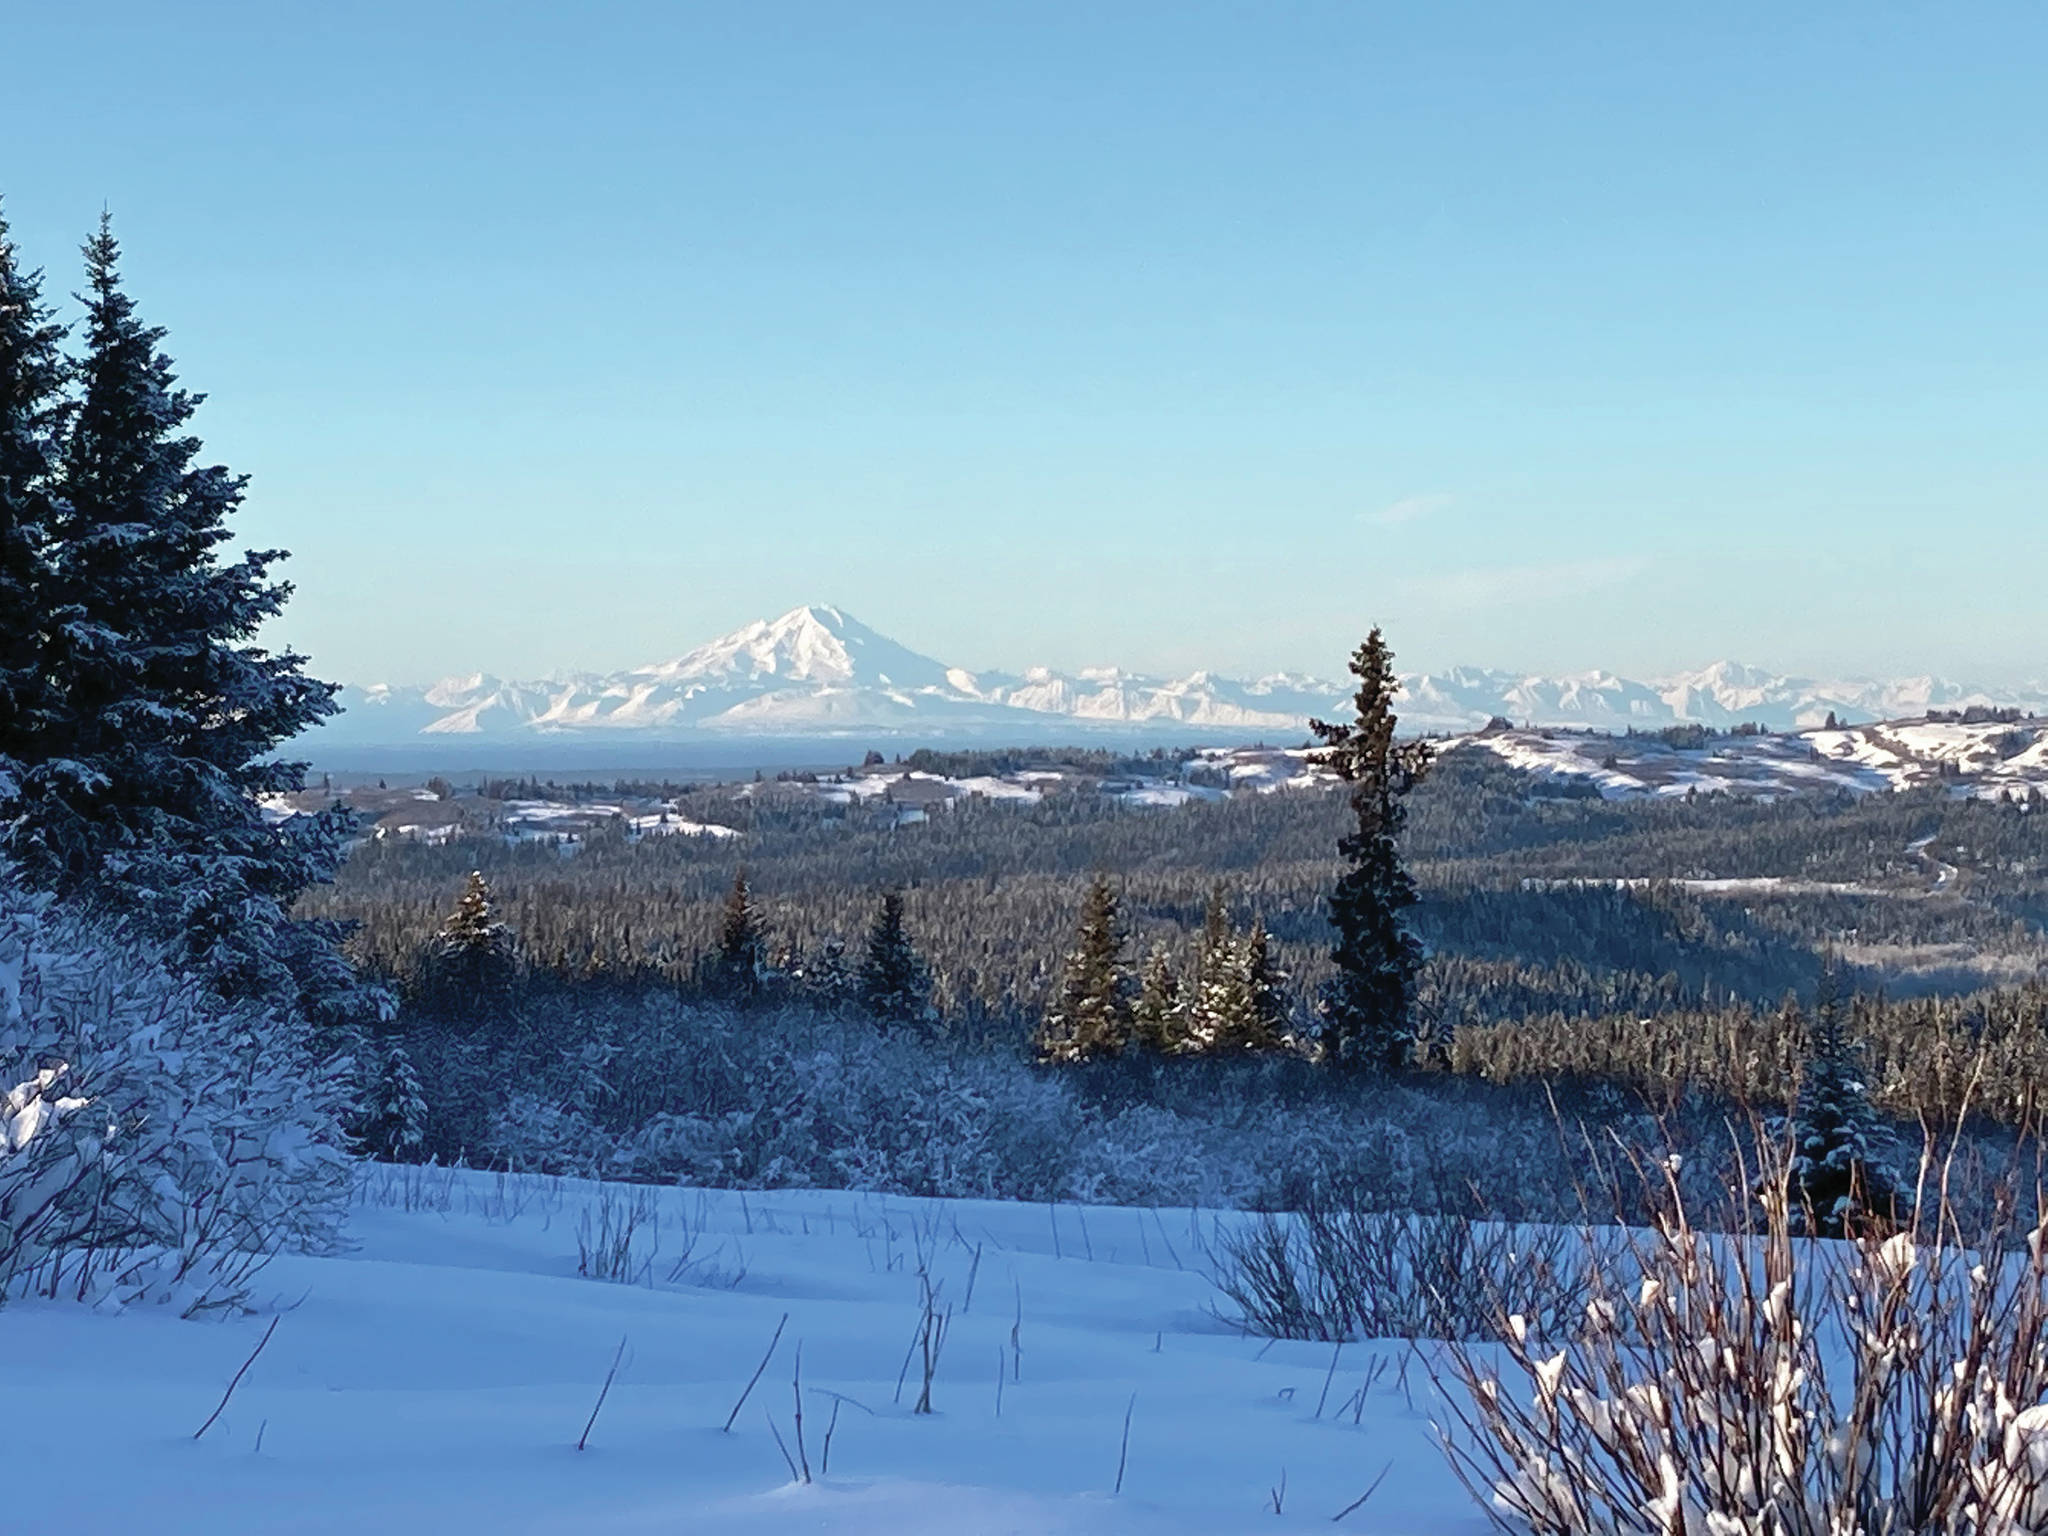 Mt. Redoubt can be seen across Cook Inlet from Diamond Ridge on the Marathon Ski Trail on Sunday, Jan. 24, 2021, near Homer, Alaska. About 4 feet of snow has fallen on Diamond Ridge and Kachemak Nordic Ski Club groomers have begun setting the trail from Lookout Mountain to Diamond Ridge Road. (Photo by Michael Armstrong/Homer News)